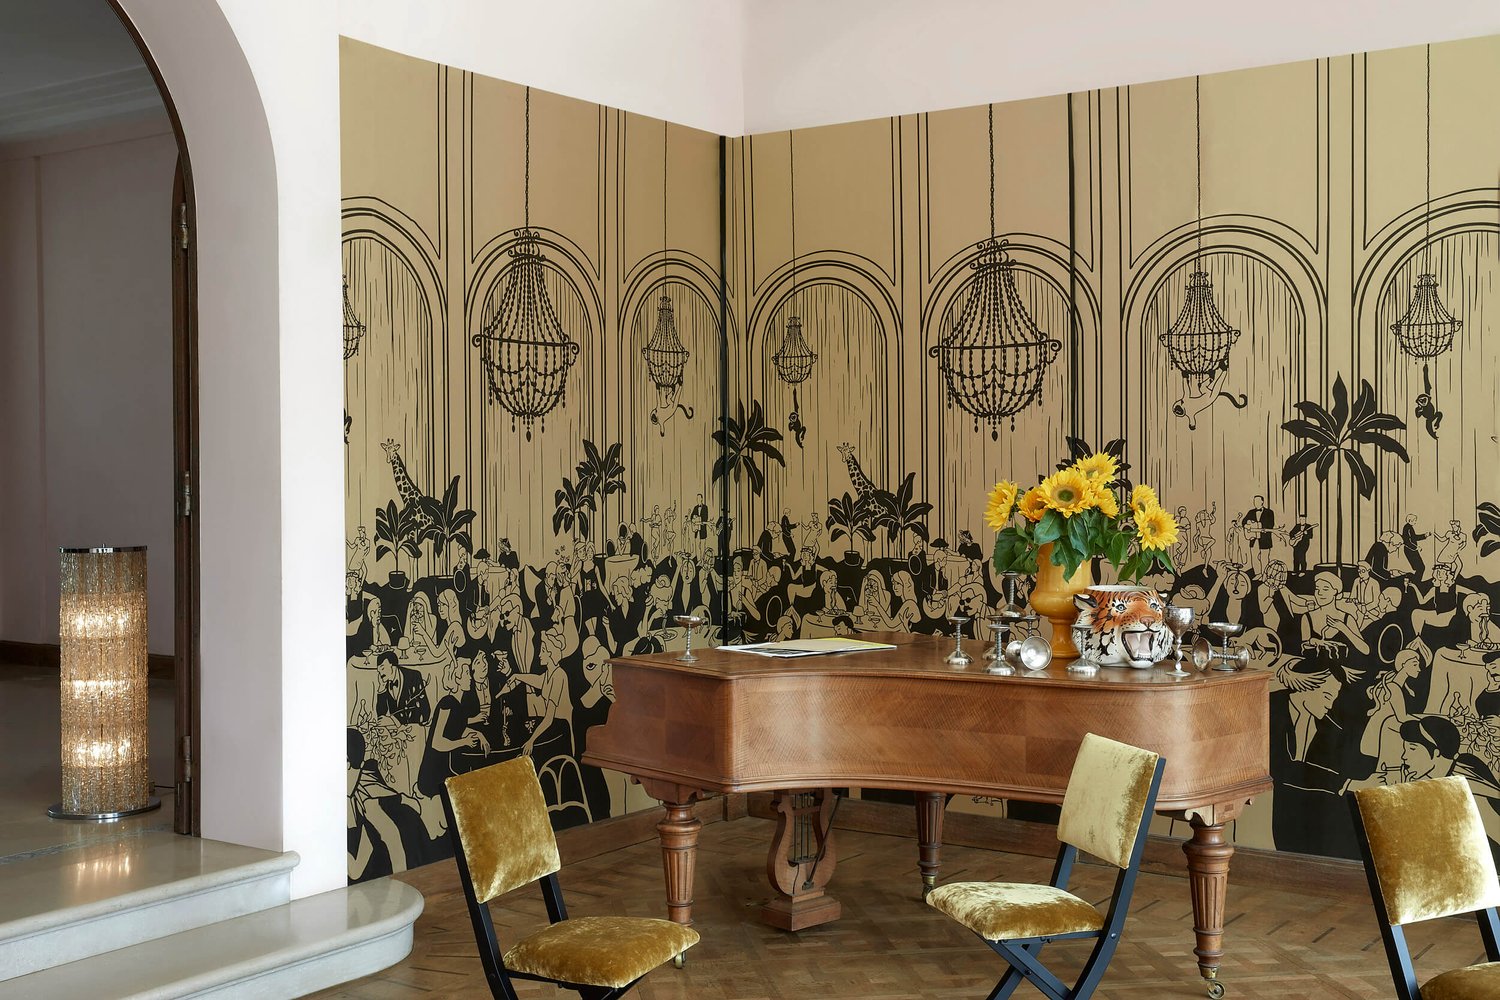 Wallcovering that provides a graphic mural in the corner of a room that resembles a jazz era busy club. In foreground is a beautiful piano and simple seating.